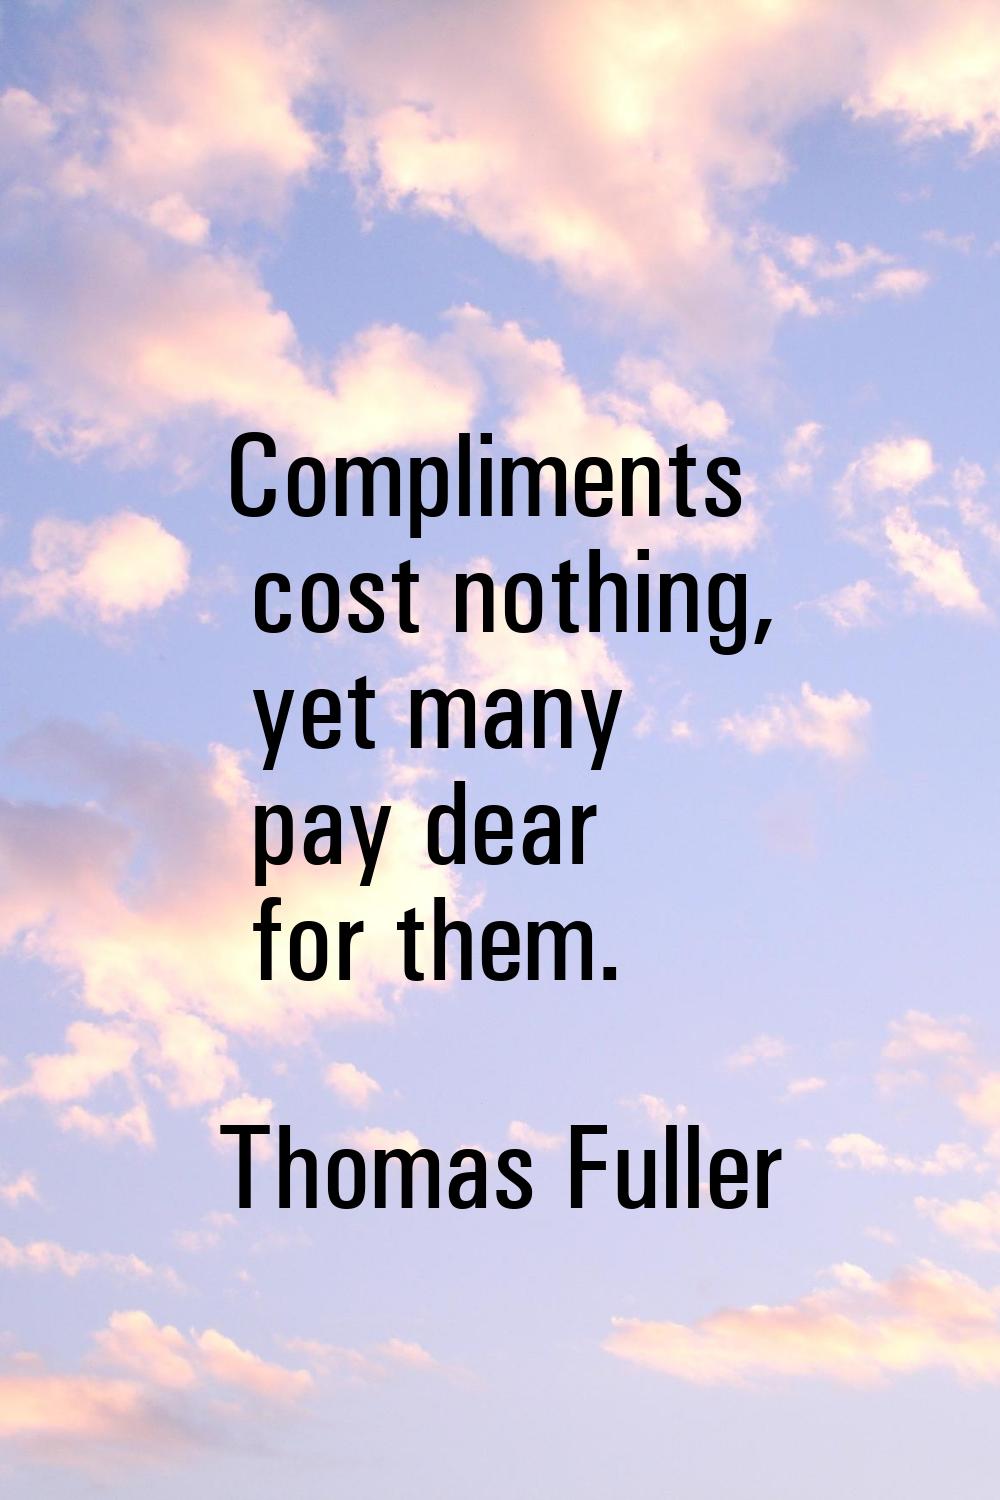 Compliments cost nothing, yet many pay dear for them.